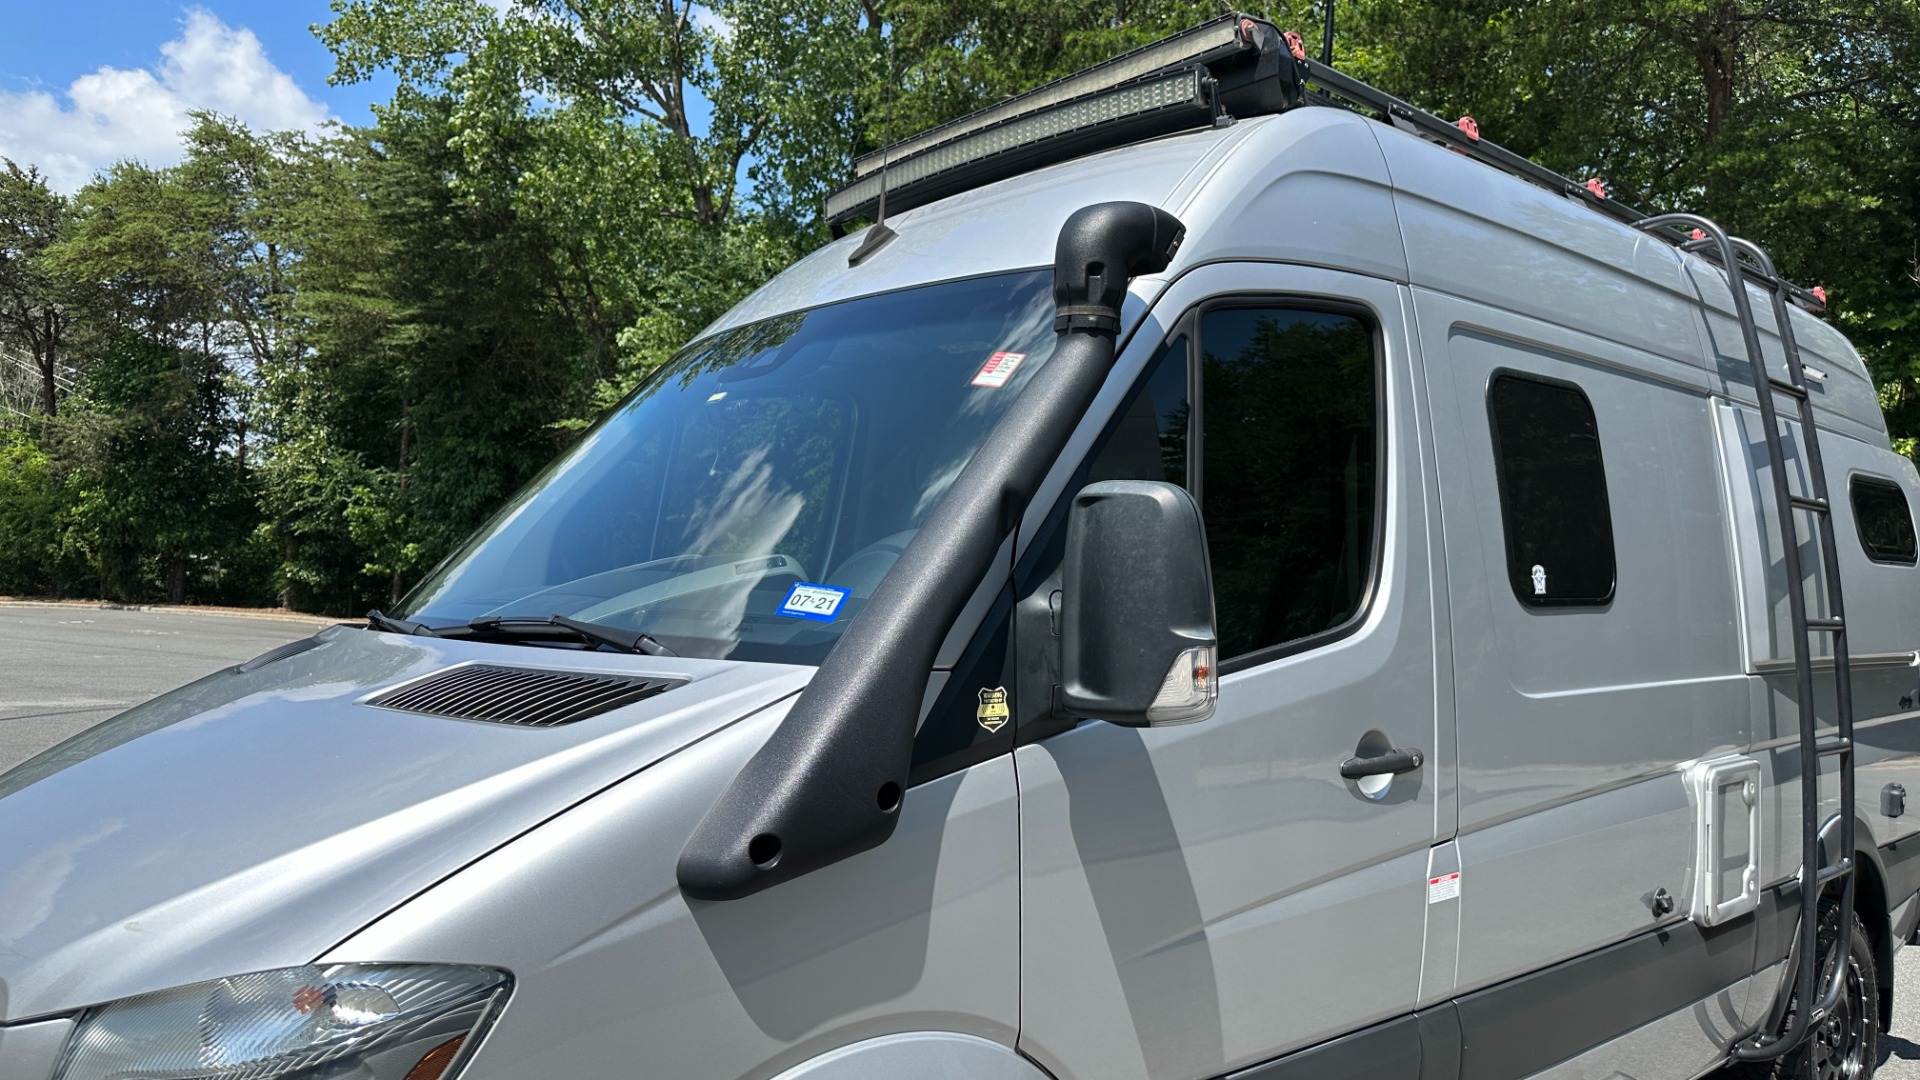 Used 2018 Mercedes-Benz Sprinter Winnebego OVERLANDER / CONVERSION SPRINTER / 4X4 / KITCHEN / BATHROOM / AIR / AWNING for sale $129,000 at Formula Imports in Charlotte NC 28227 20